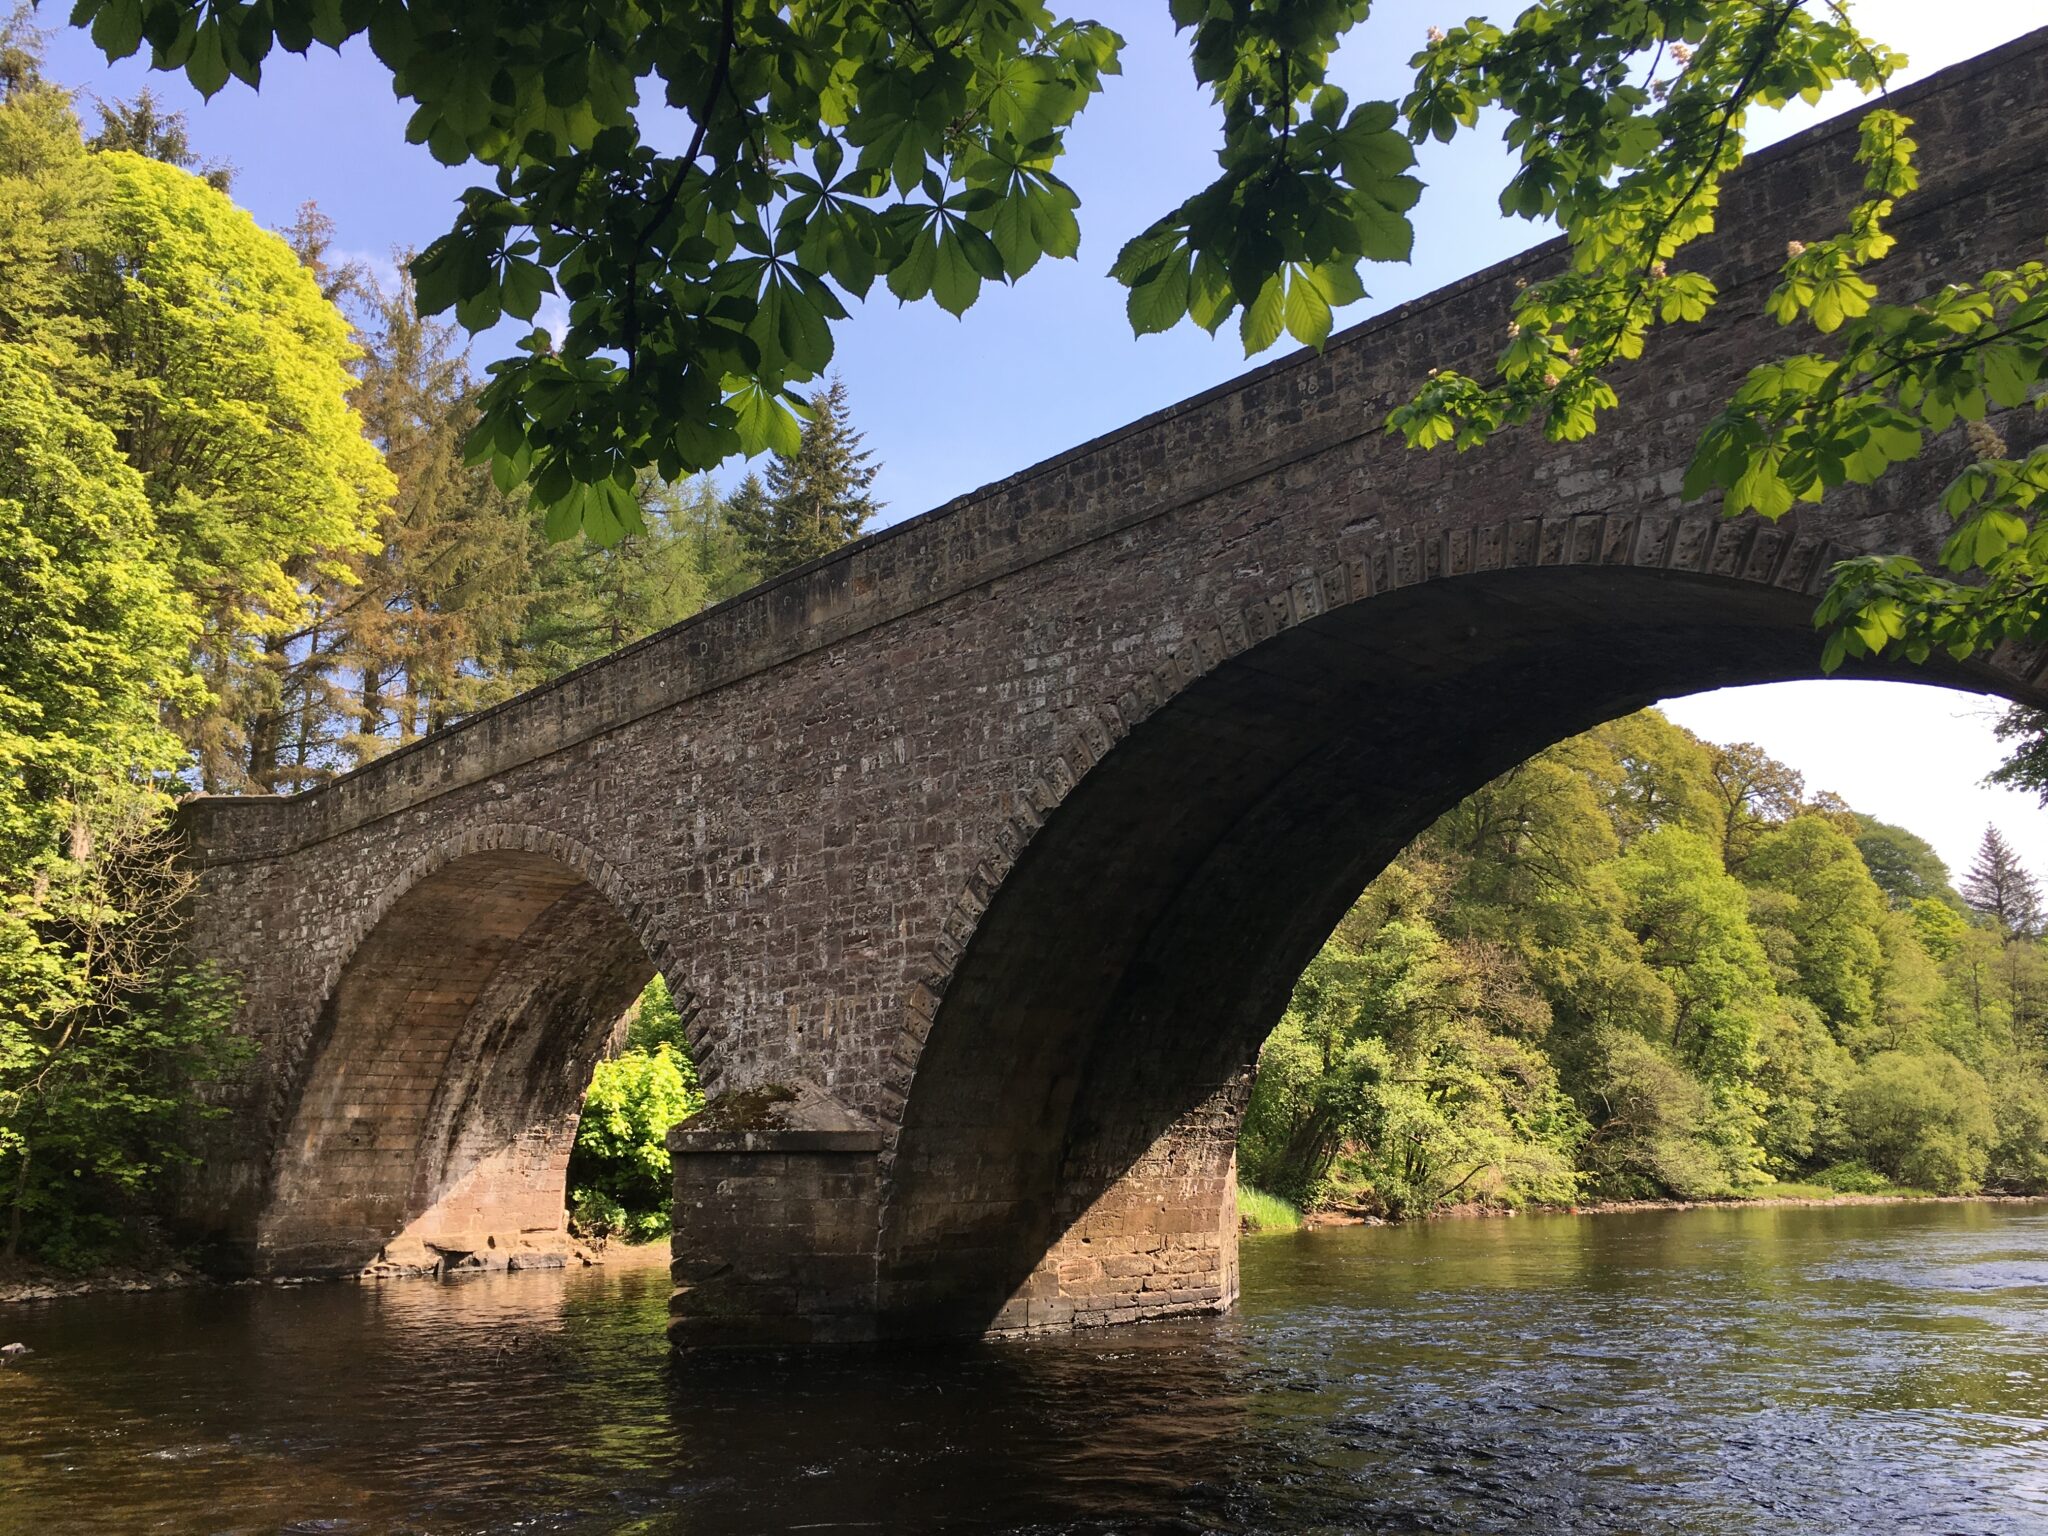 ESSENTIAL SURFACING IMROVEMENTS PLANNED FOR A84 BRIDGE OF TEITH IN DOUNE